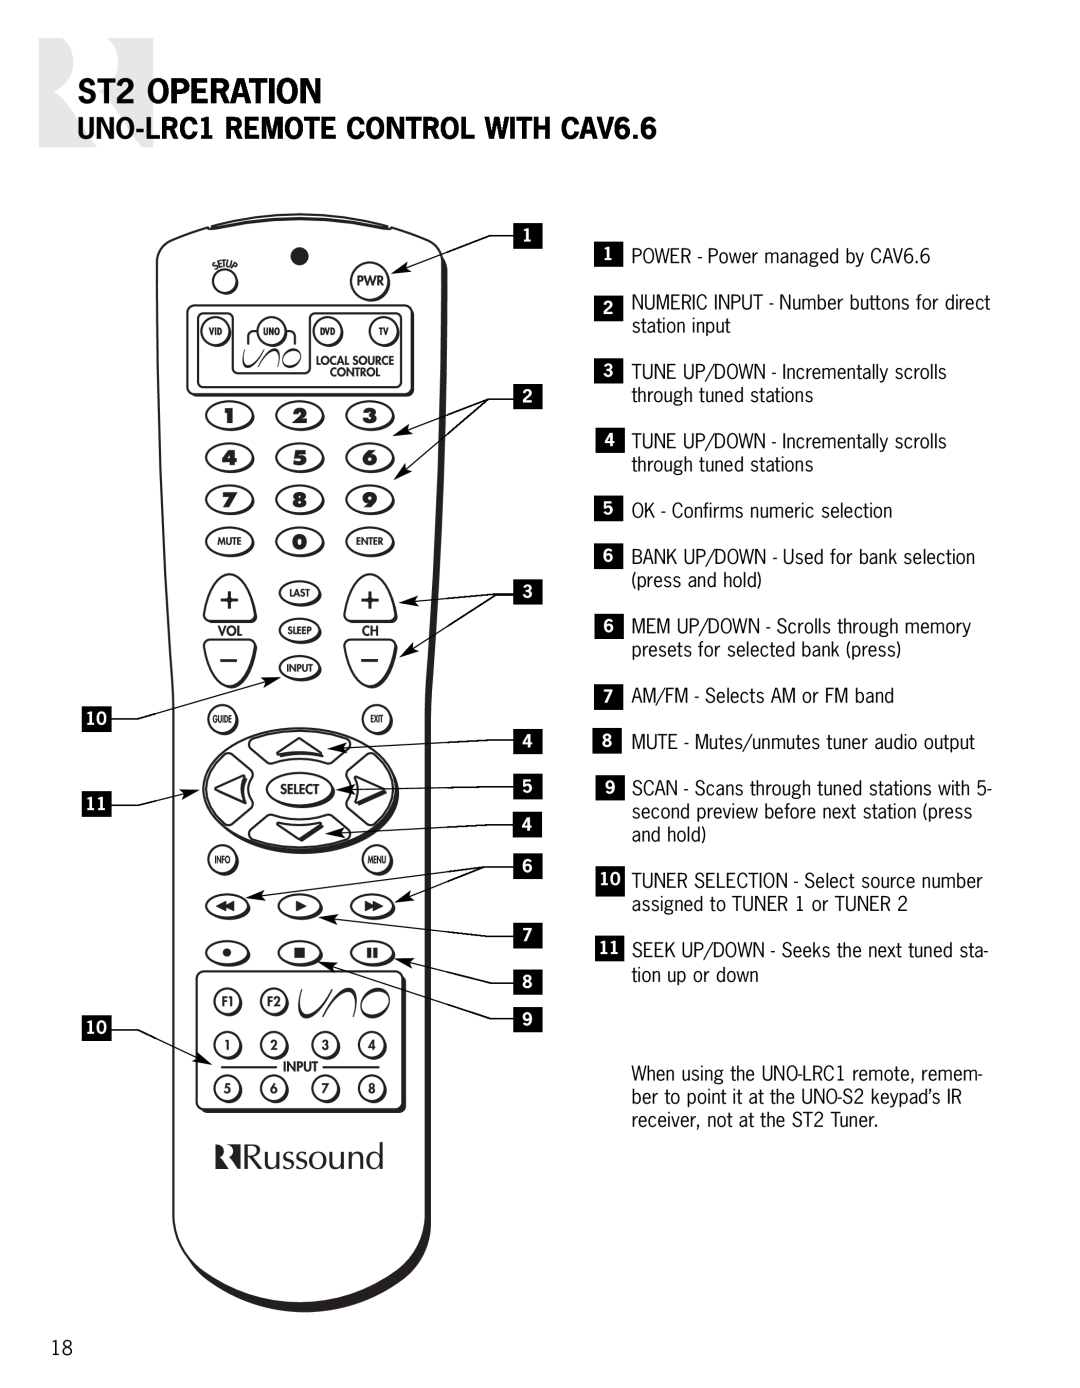 Russound instruction manual ST2 OPERATION, UNO-LRC1 REMOTE CONTROL WITH CAV6.6, POWER - Power managed by CAV6.6 